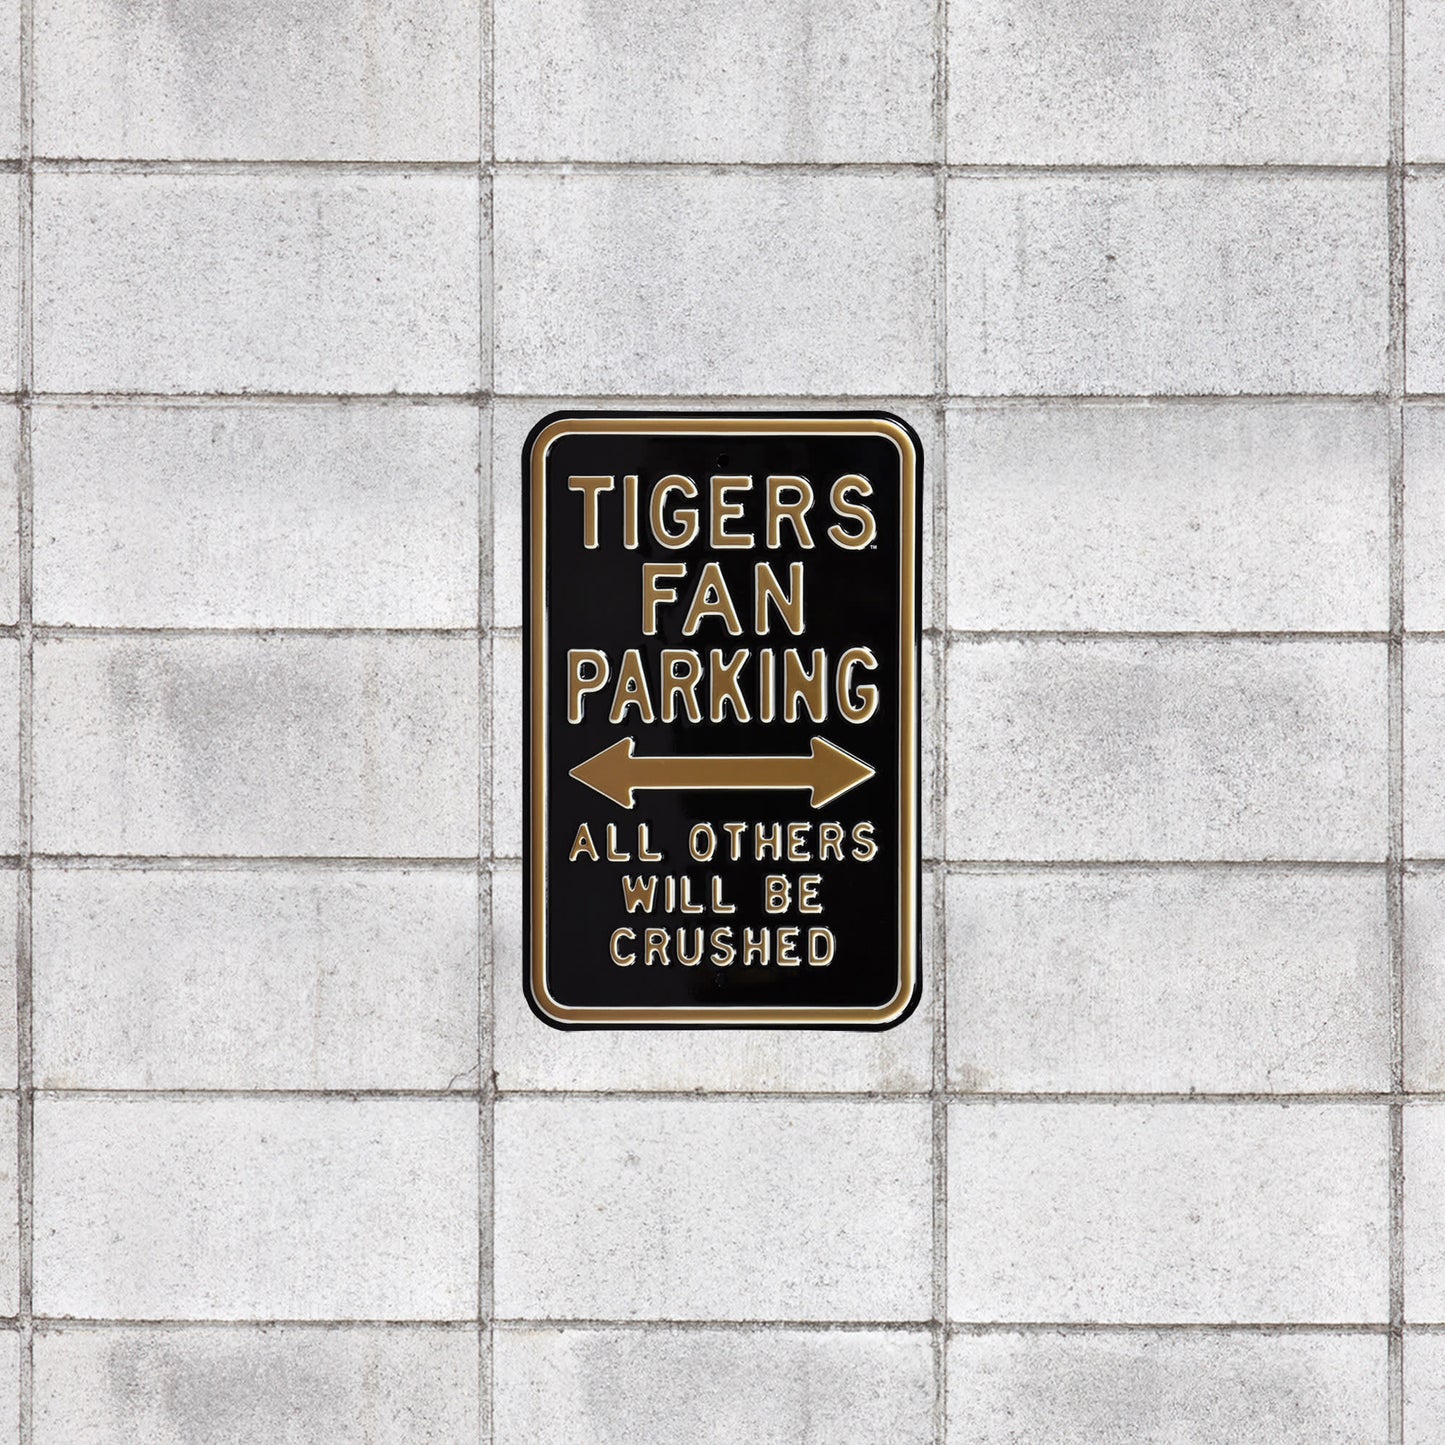 Missouri Tigers: Crushed Parking - Officially Licensed Metal Street Sign